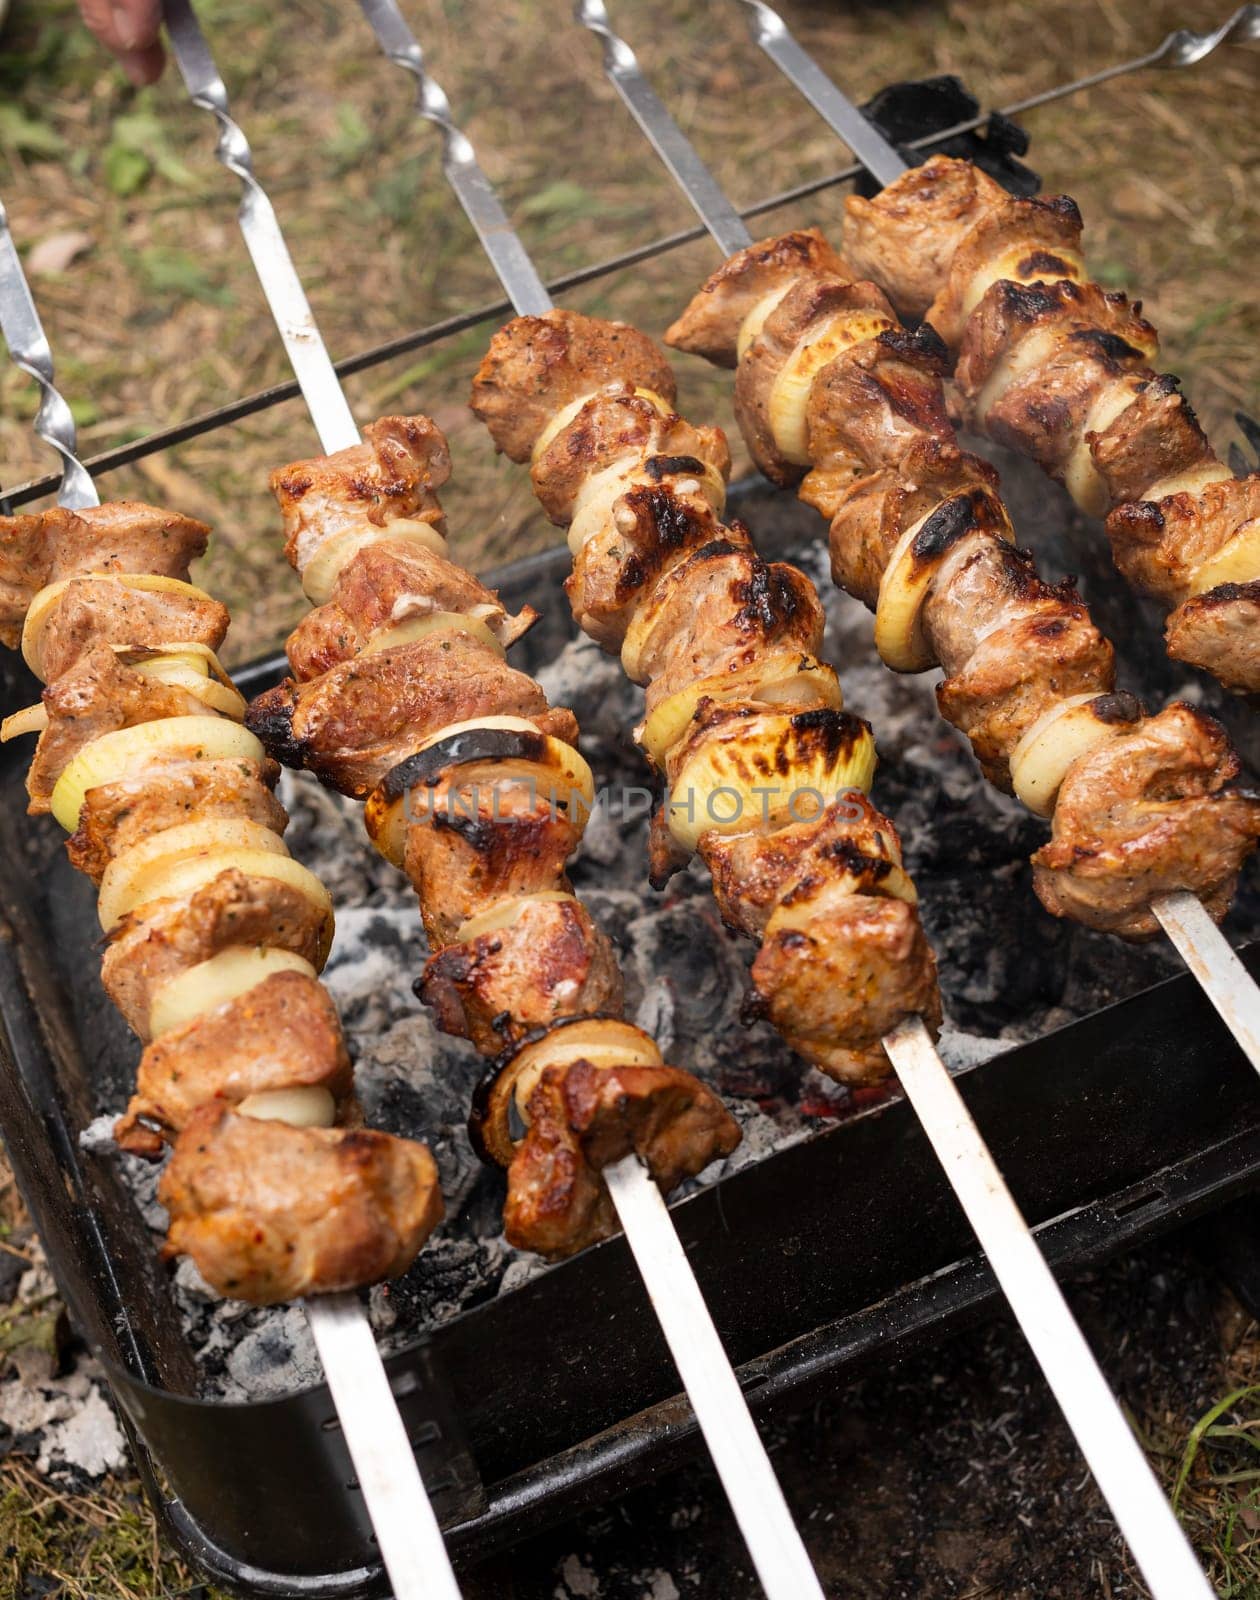 Close Up Cooking Meat Barbecue On The Coal In Camping Park, Forest. Meat , Onion Rings Strung On Skewers. No Waste Healthy Eating Picnic In Summer, Spring Time. Vertical Plane. High Quality Photo